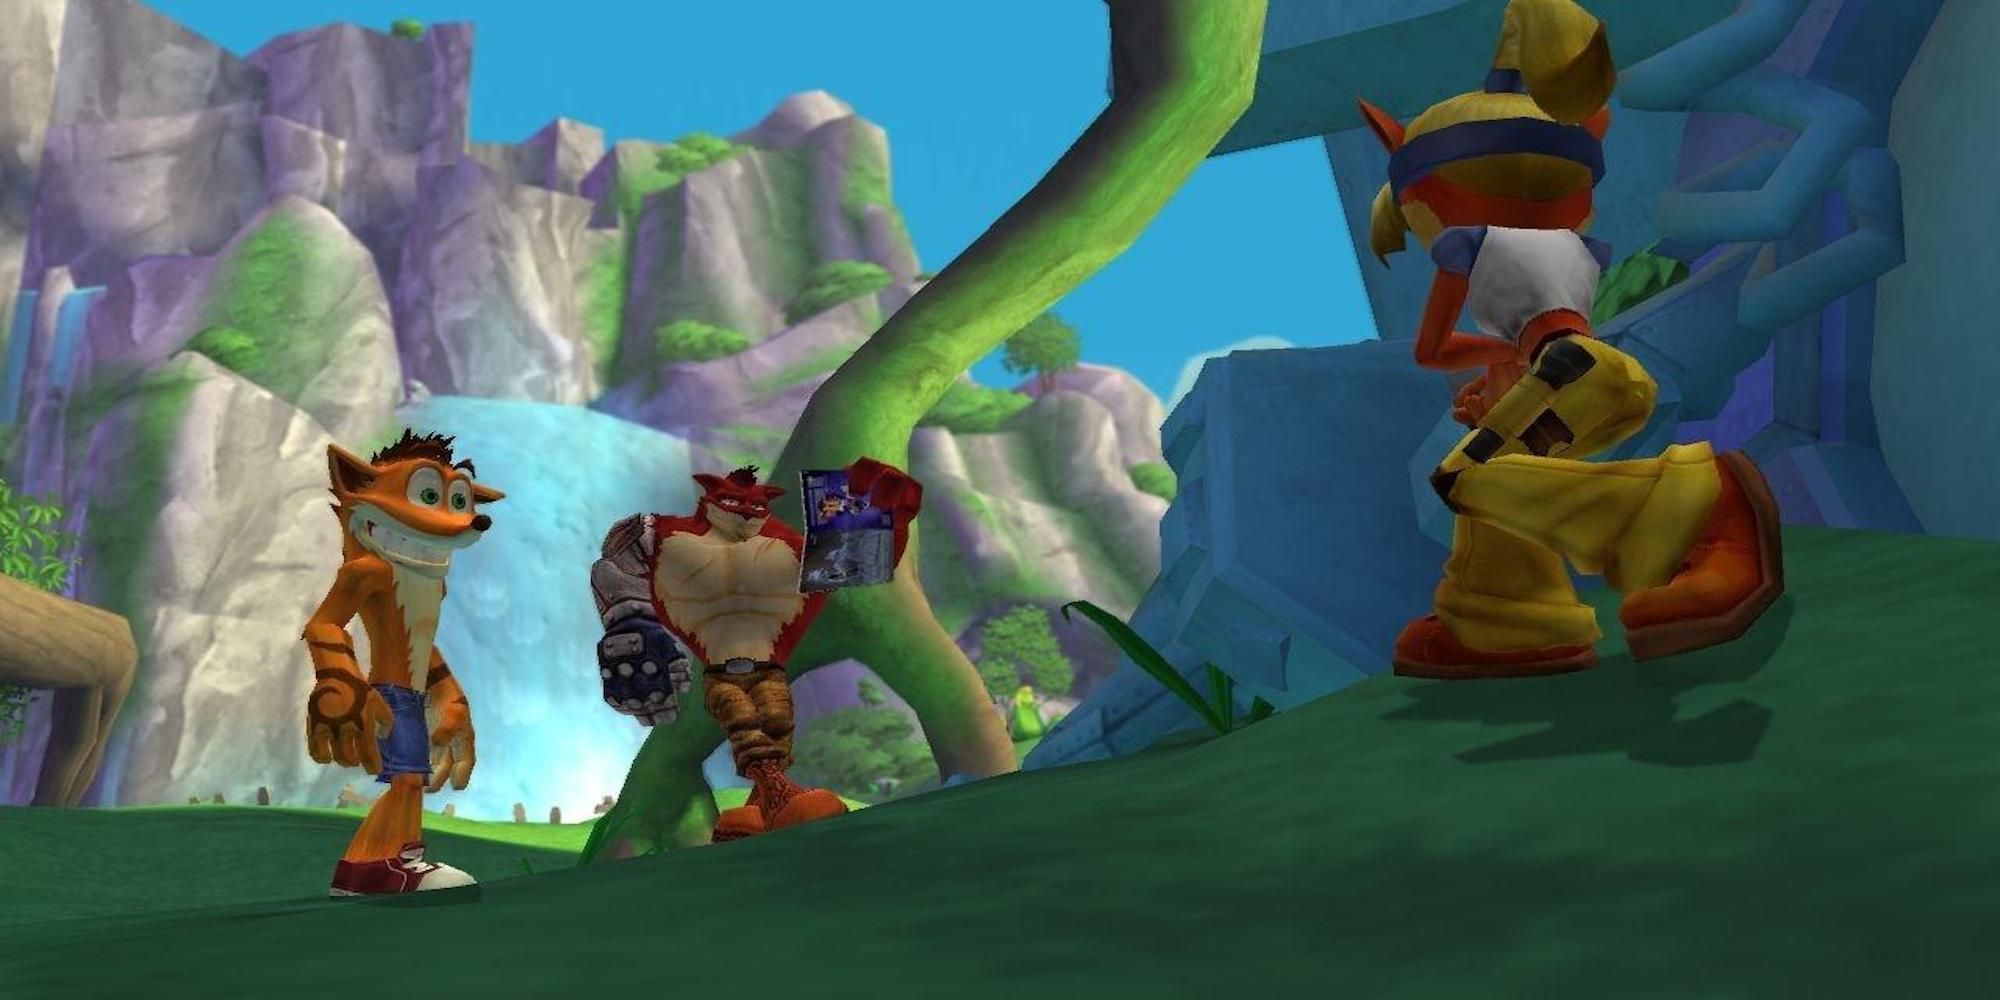 A cutscene featuring characters in Crash Mind Over Mutant